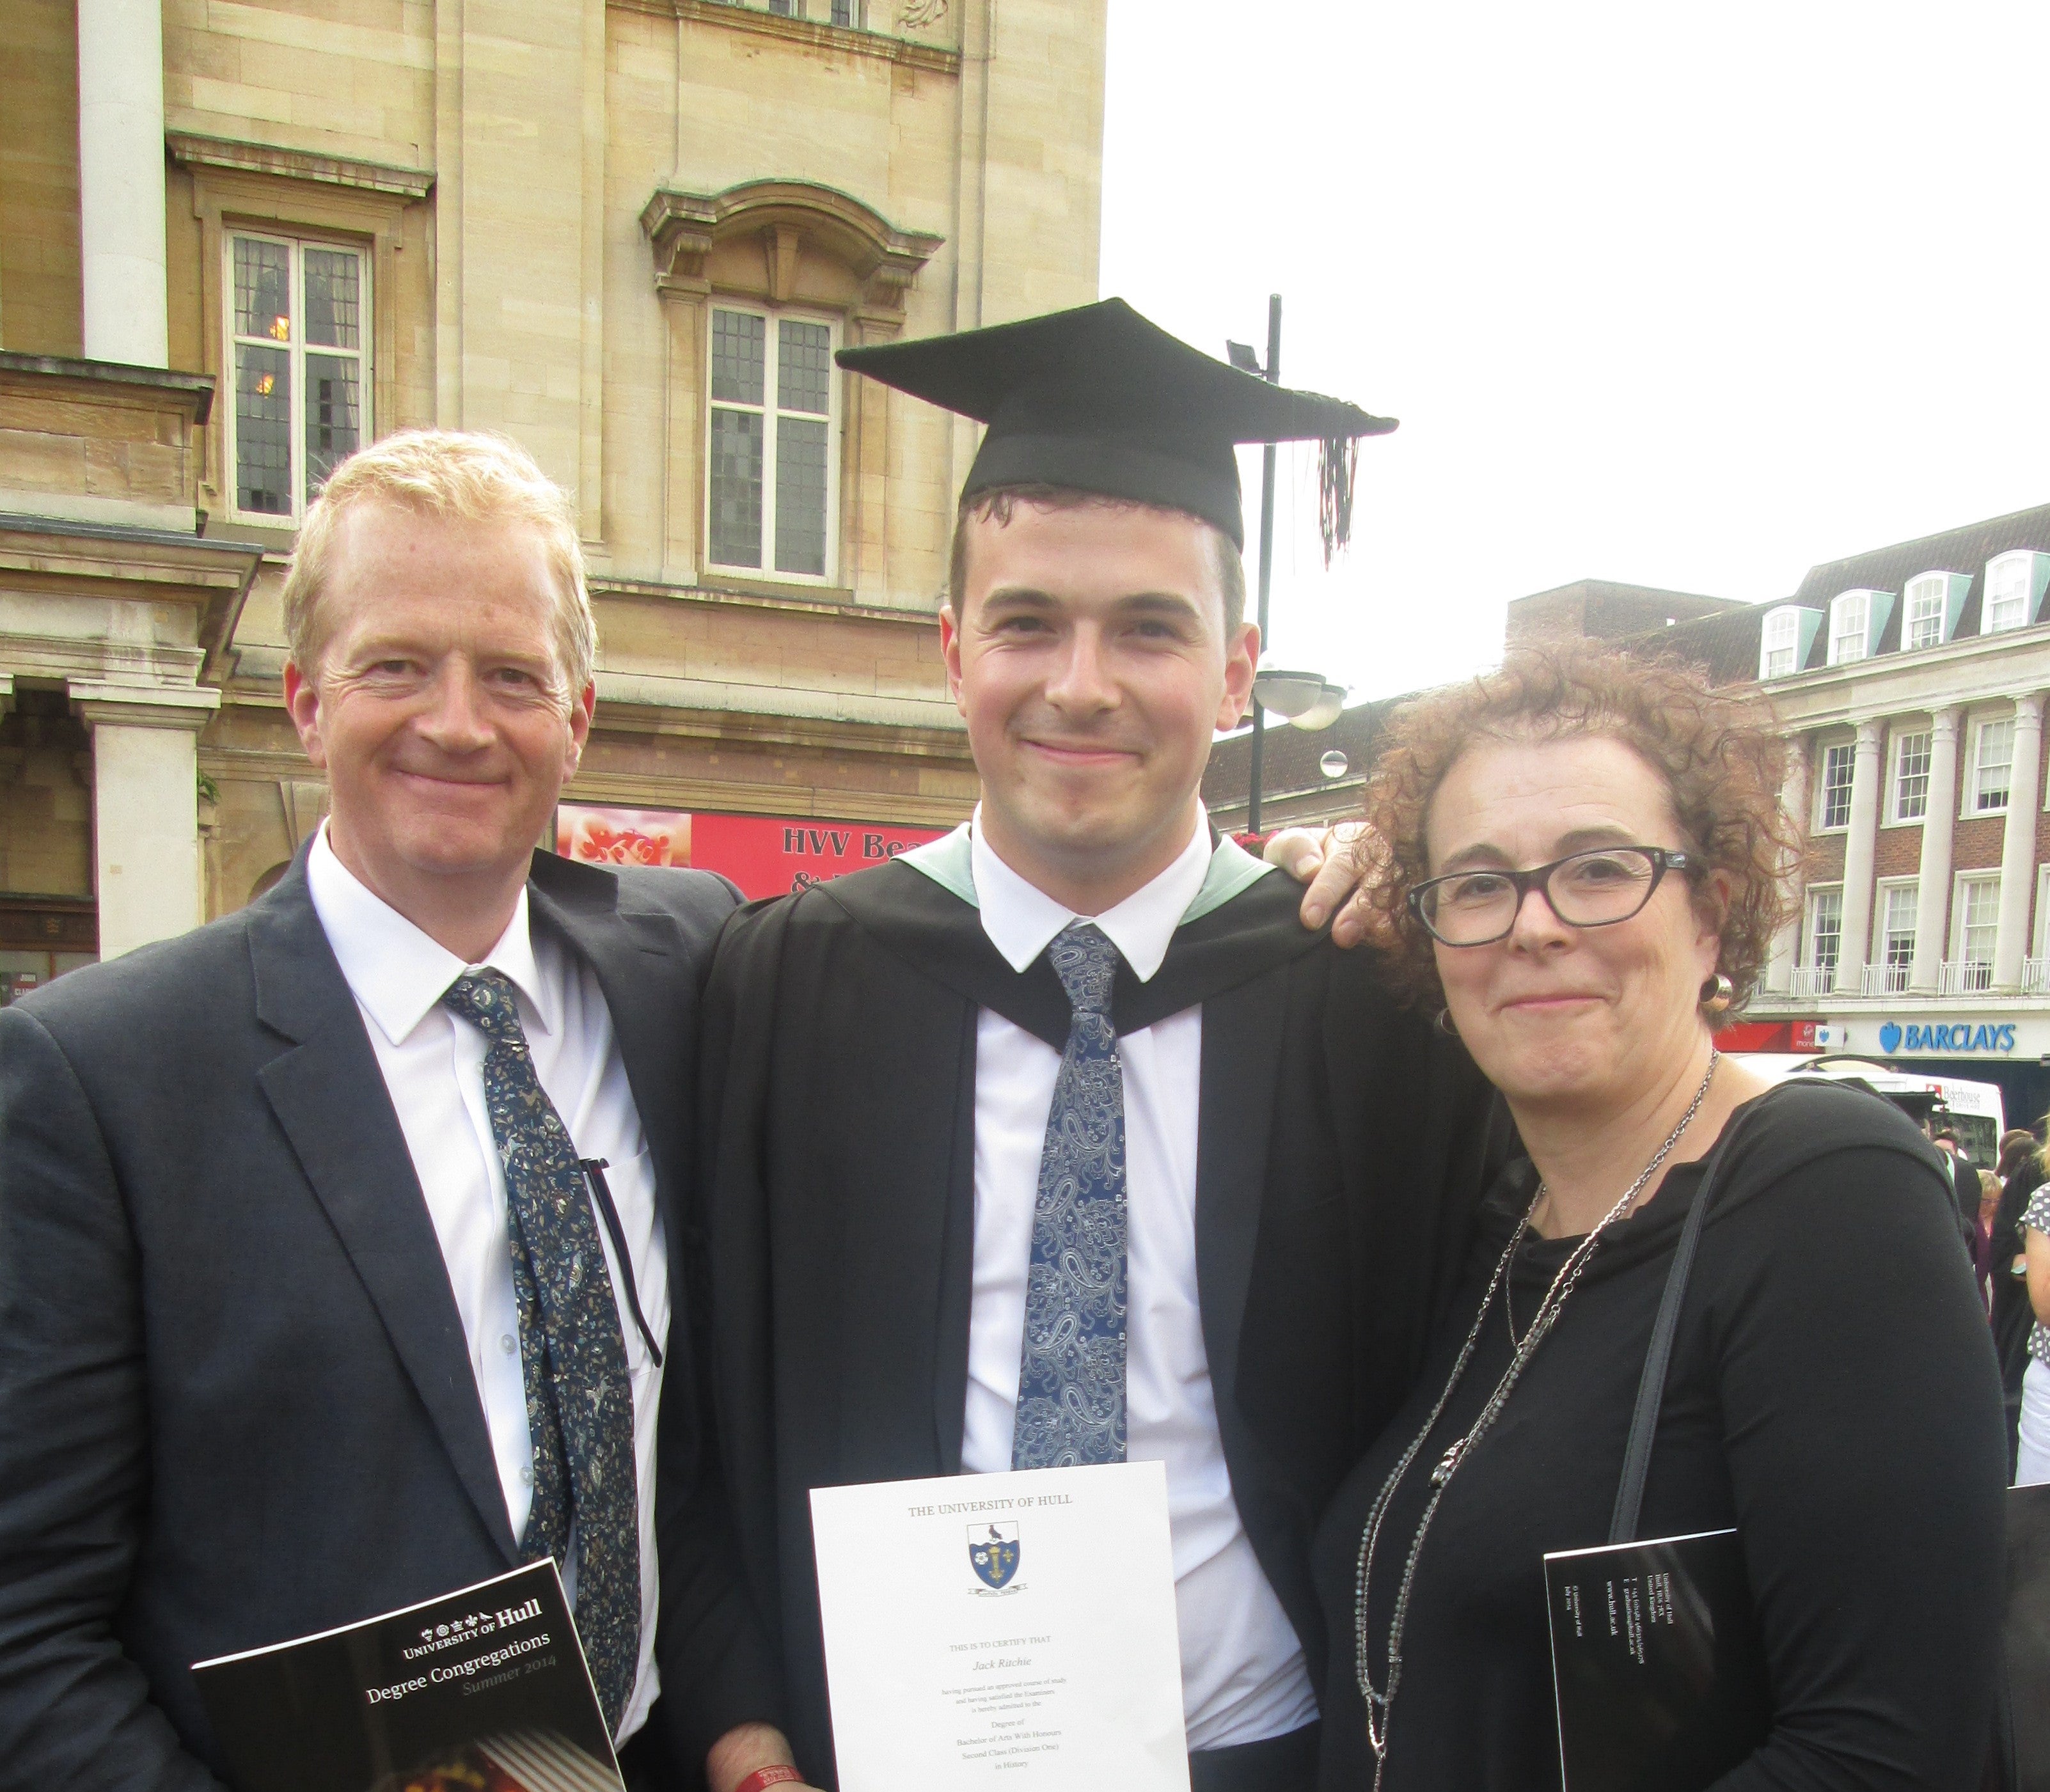 Charles and Liz Ritchie with their son Jack at his graduation from Hull University (family handout/PA)